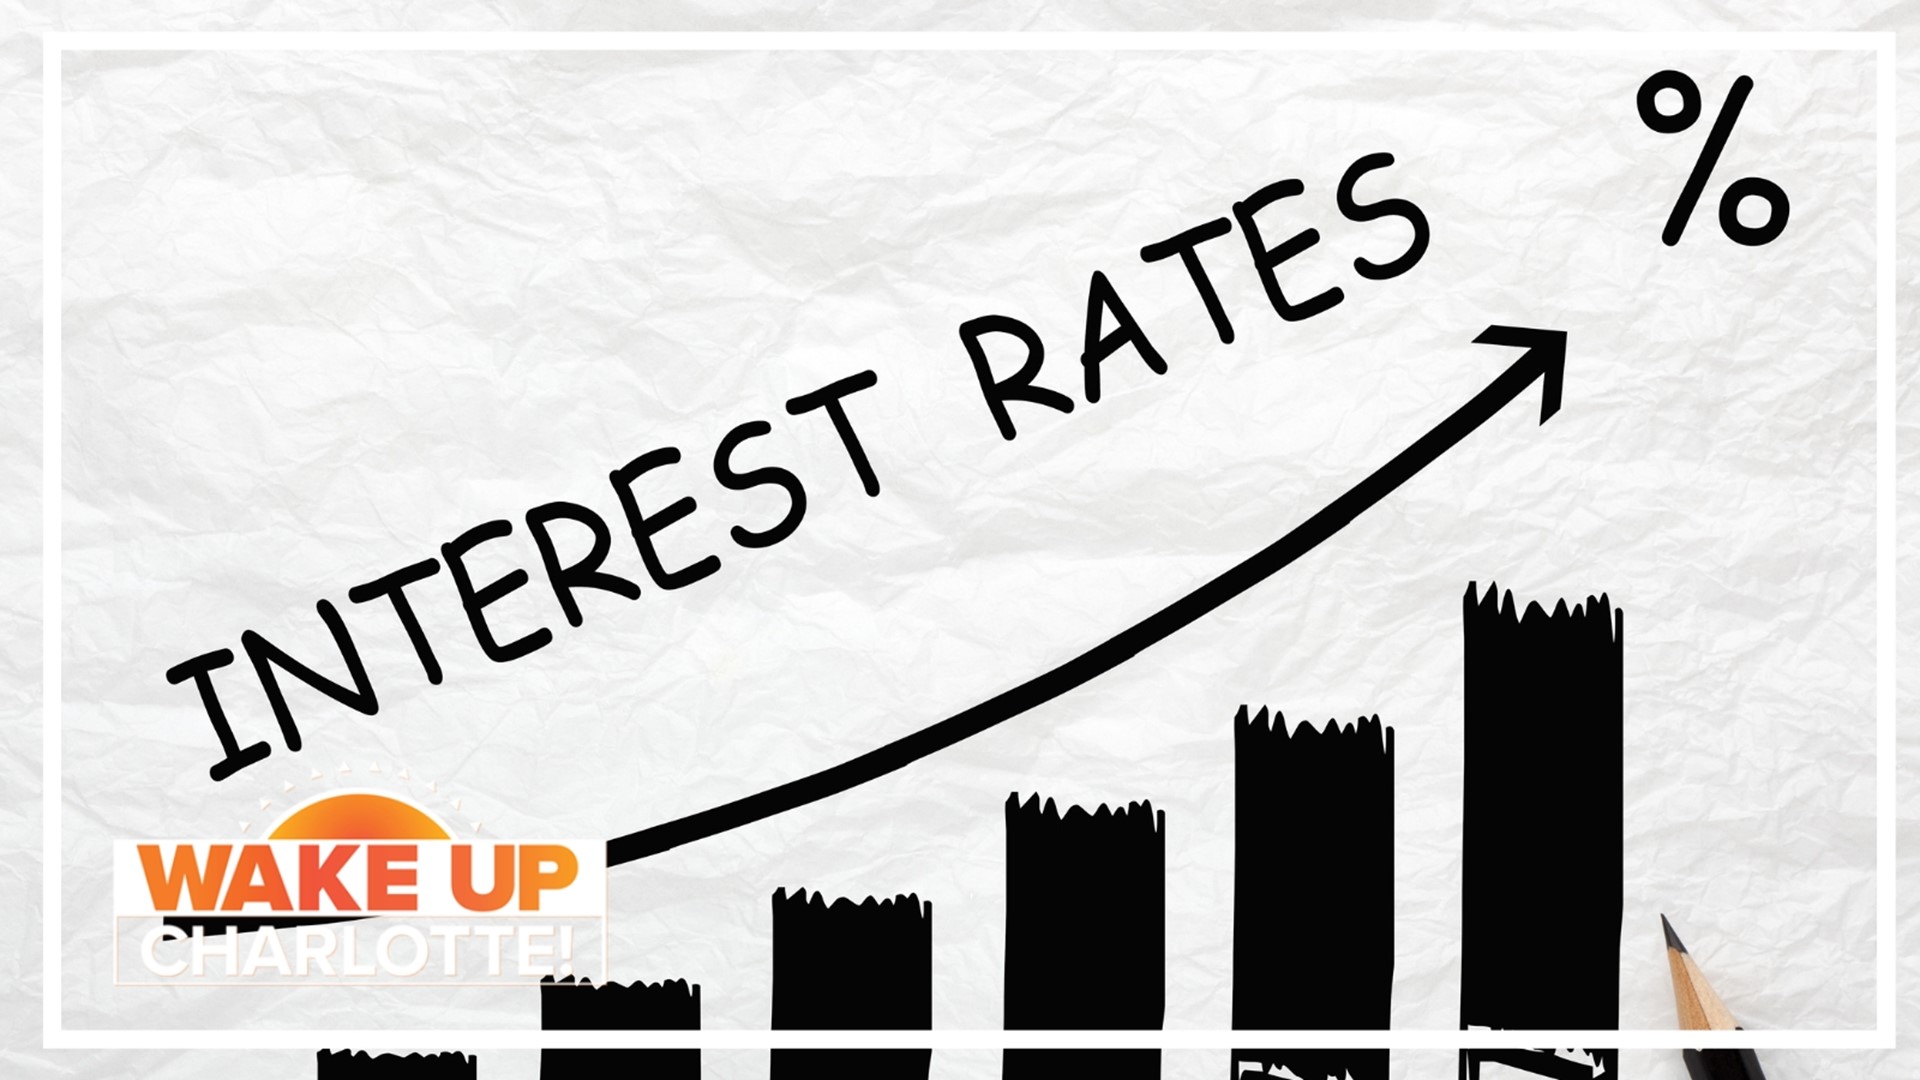 We look into financial issues and how they  impact women - specifically interest rates.